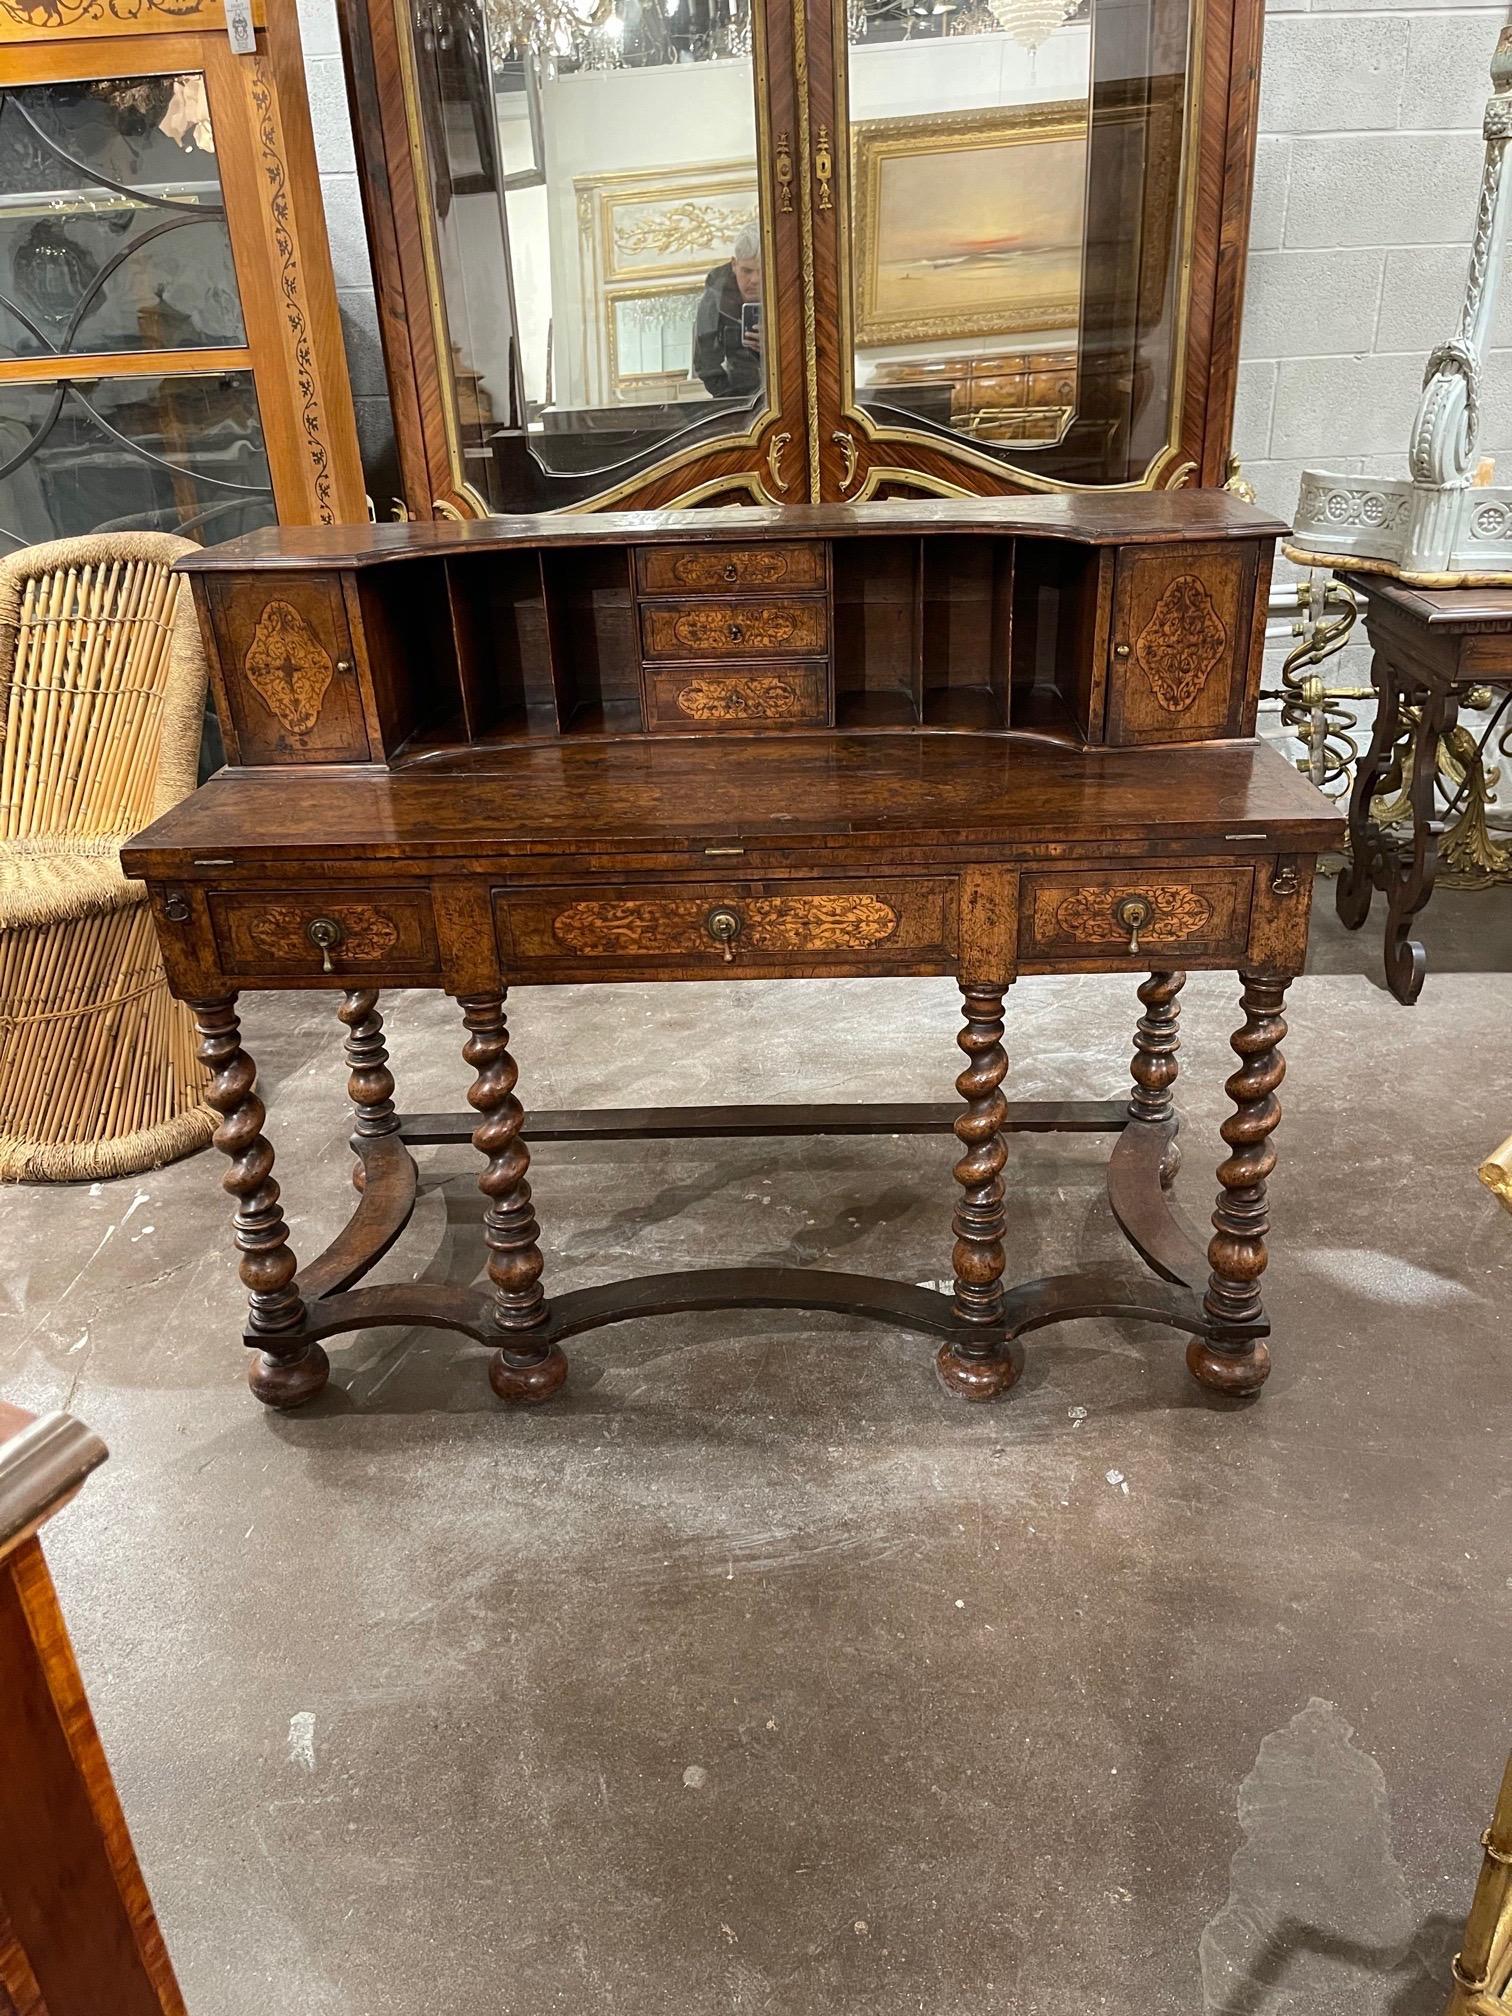 Handsome 19th century English William and Mary carved inlaid walnut desk. Pretty floral images and lots of areas for storage. A splendid piece!